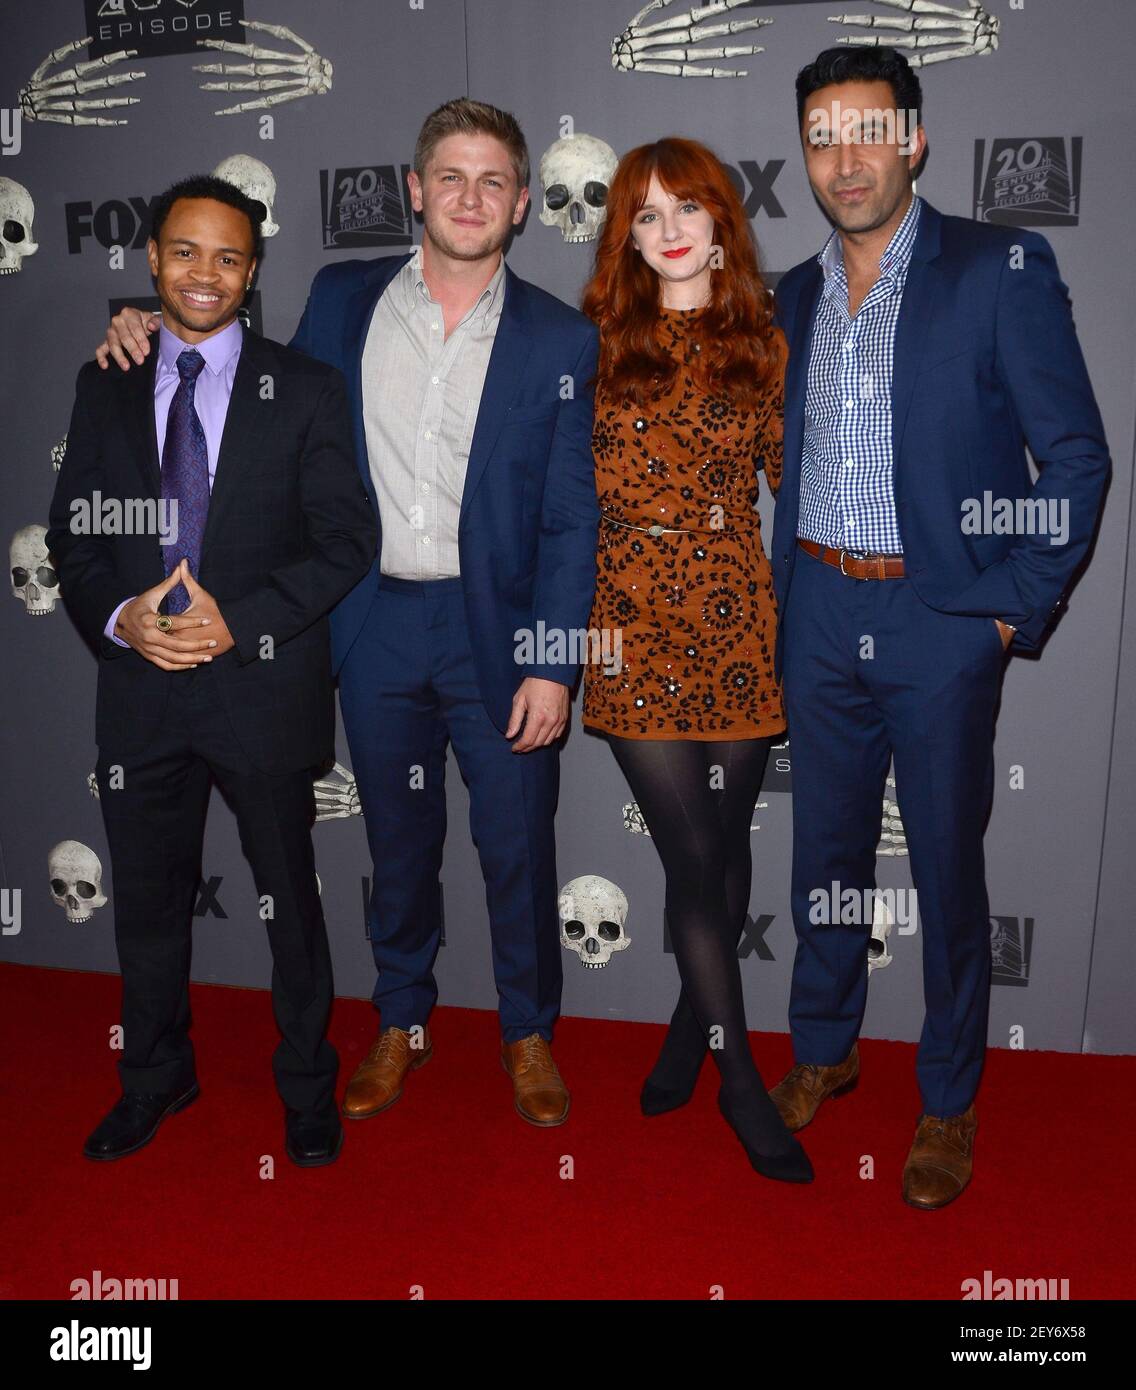 08 December 2014 - West Hollywood, California - Eugene Byrd, Michael Grant  Terry, Carla Gallo, Pej Vahdat . Cast and executive producers celebrate the  200th episode of FOX's "Bones" held at Herringbone